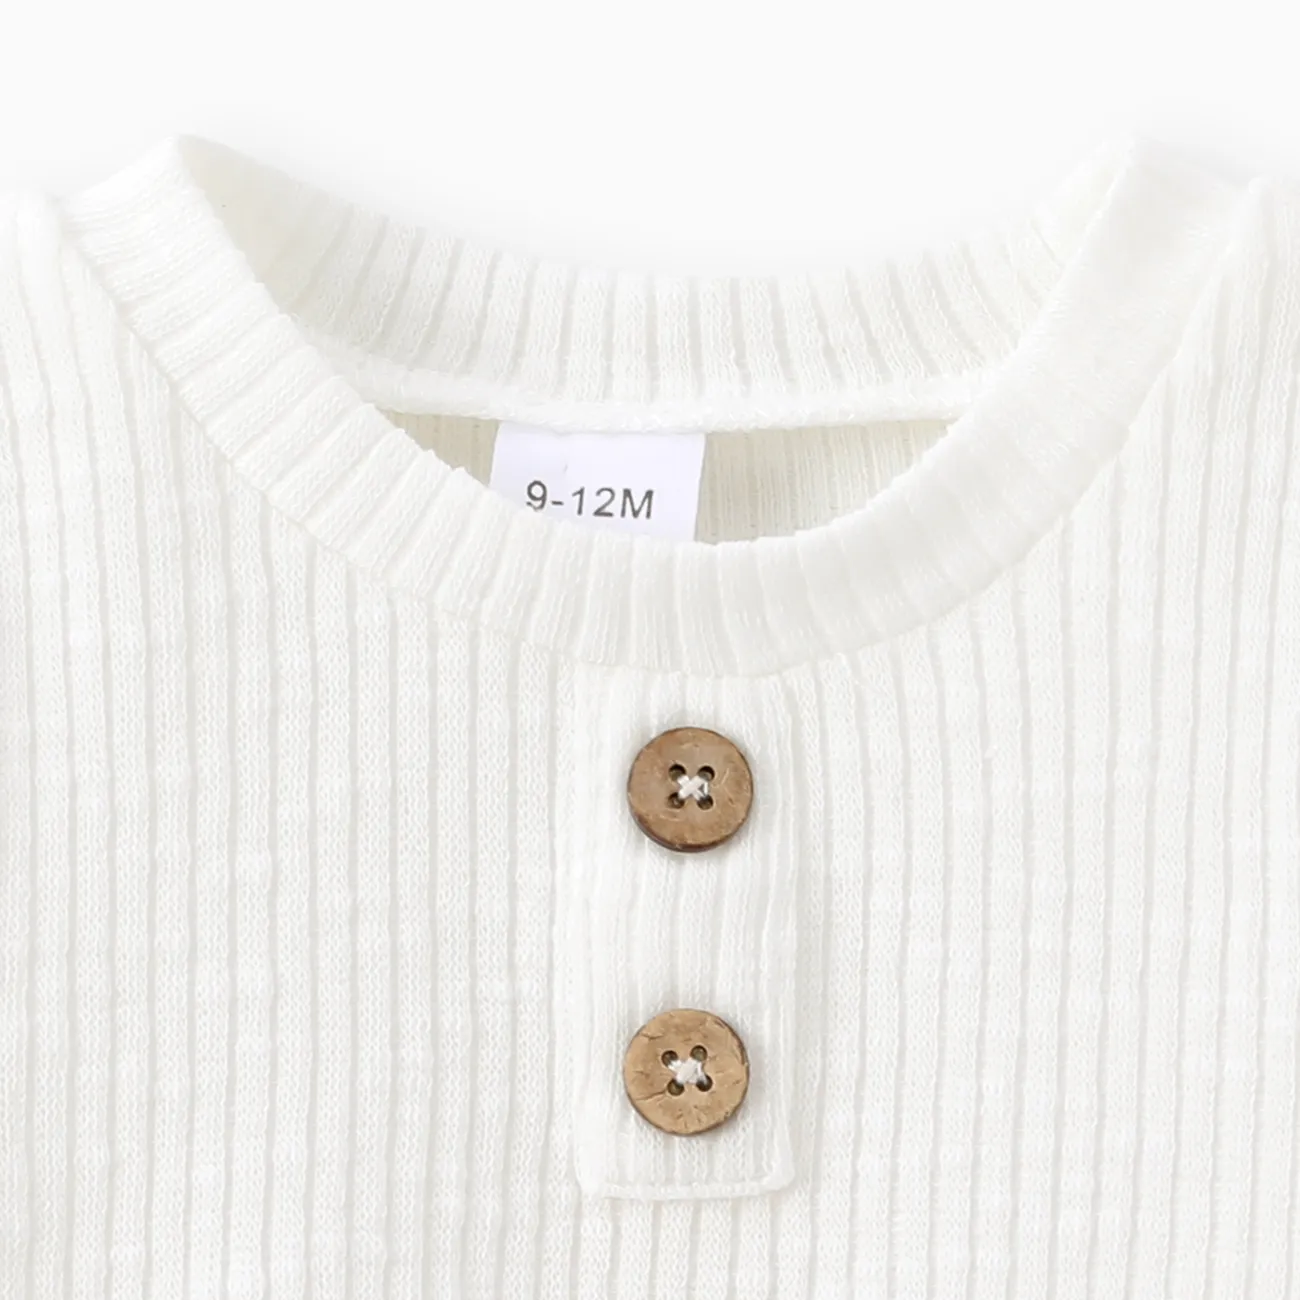 Baby Boy/Girl Button Design Solid Ribbed Knitted Long-sleeve Pullover Top White big image 1